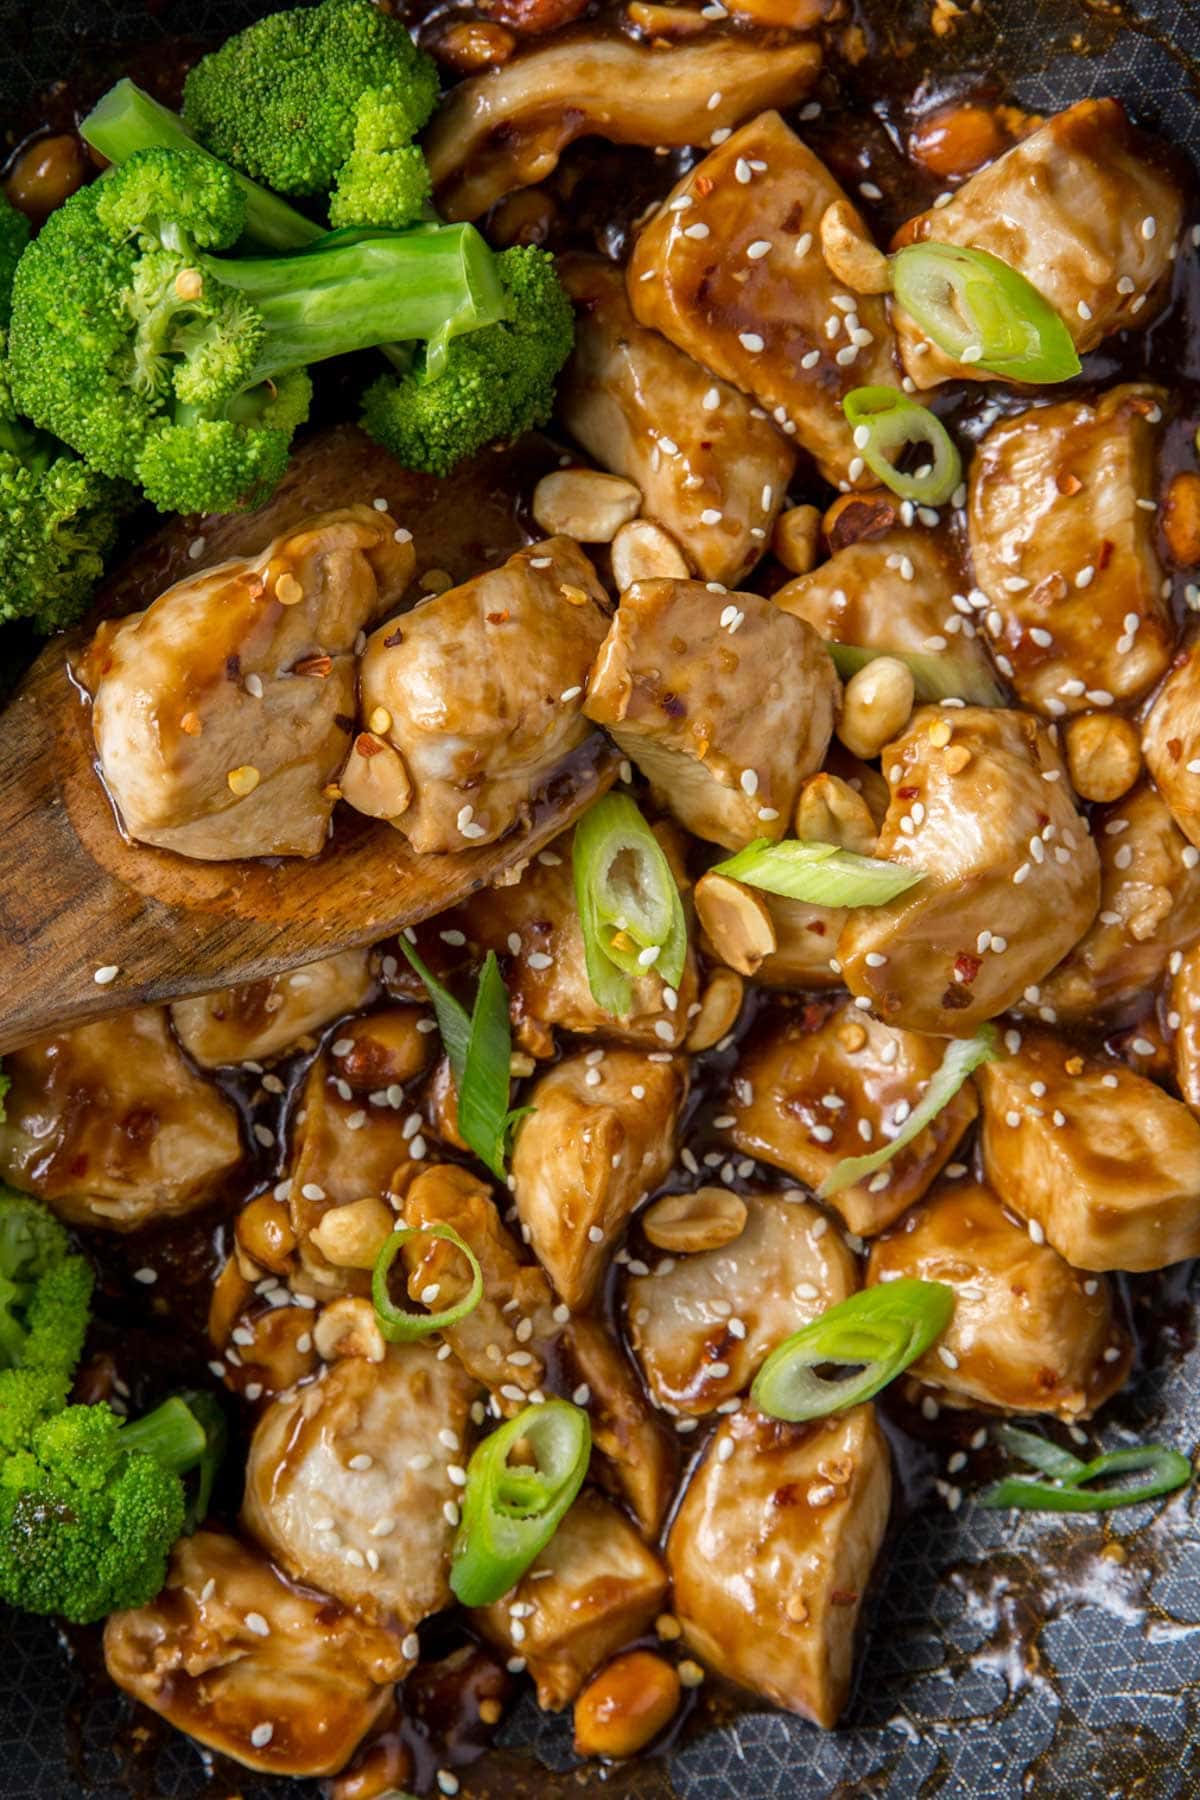 chicken with kung pao sauce, broccoli, black wok, green onions